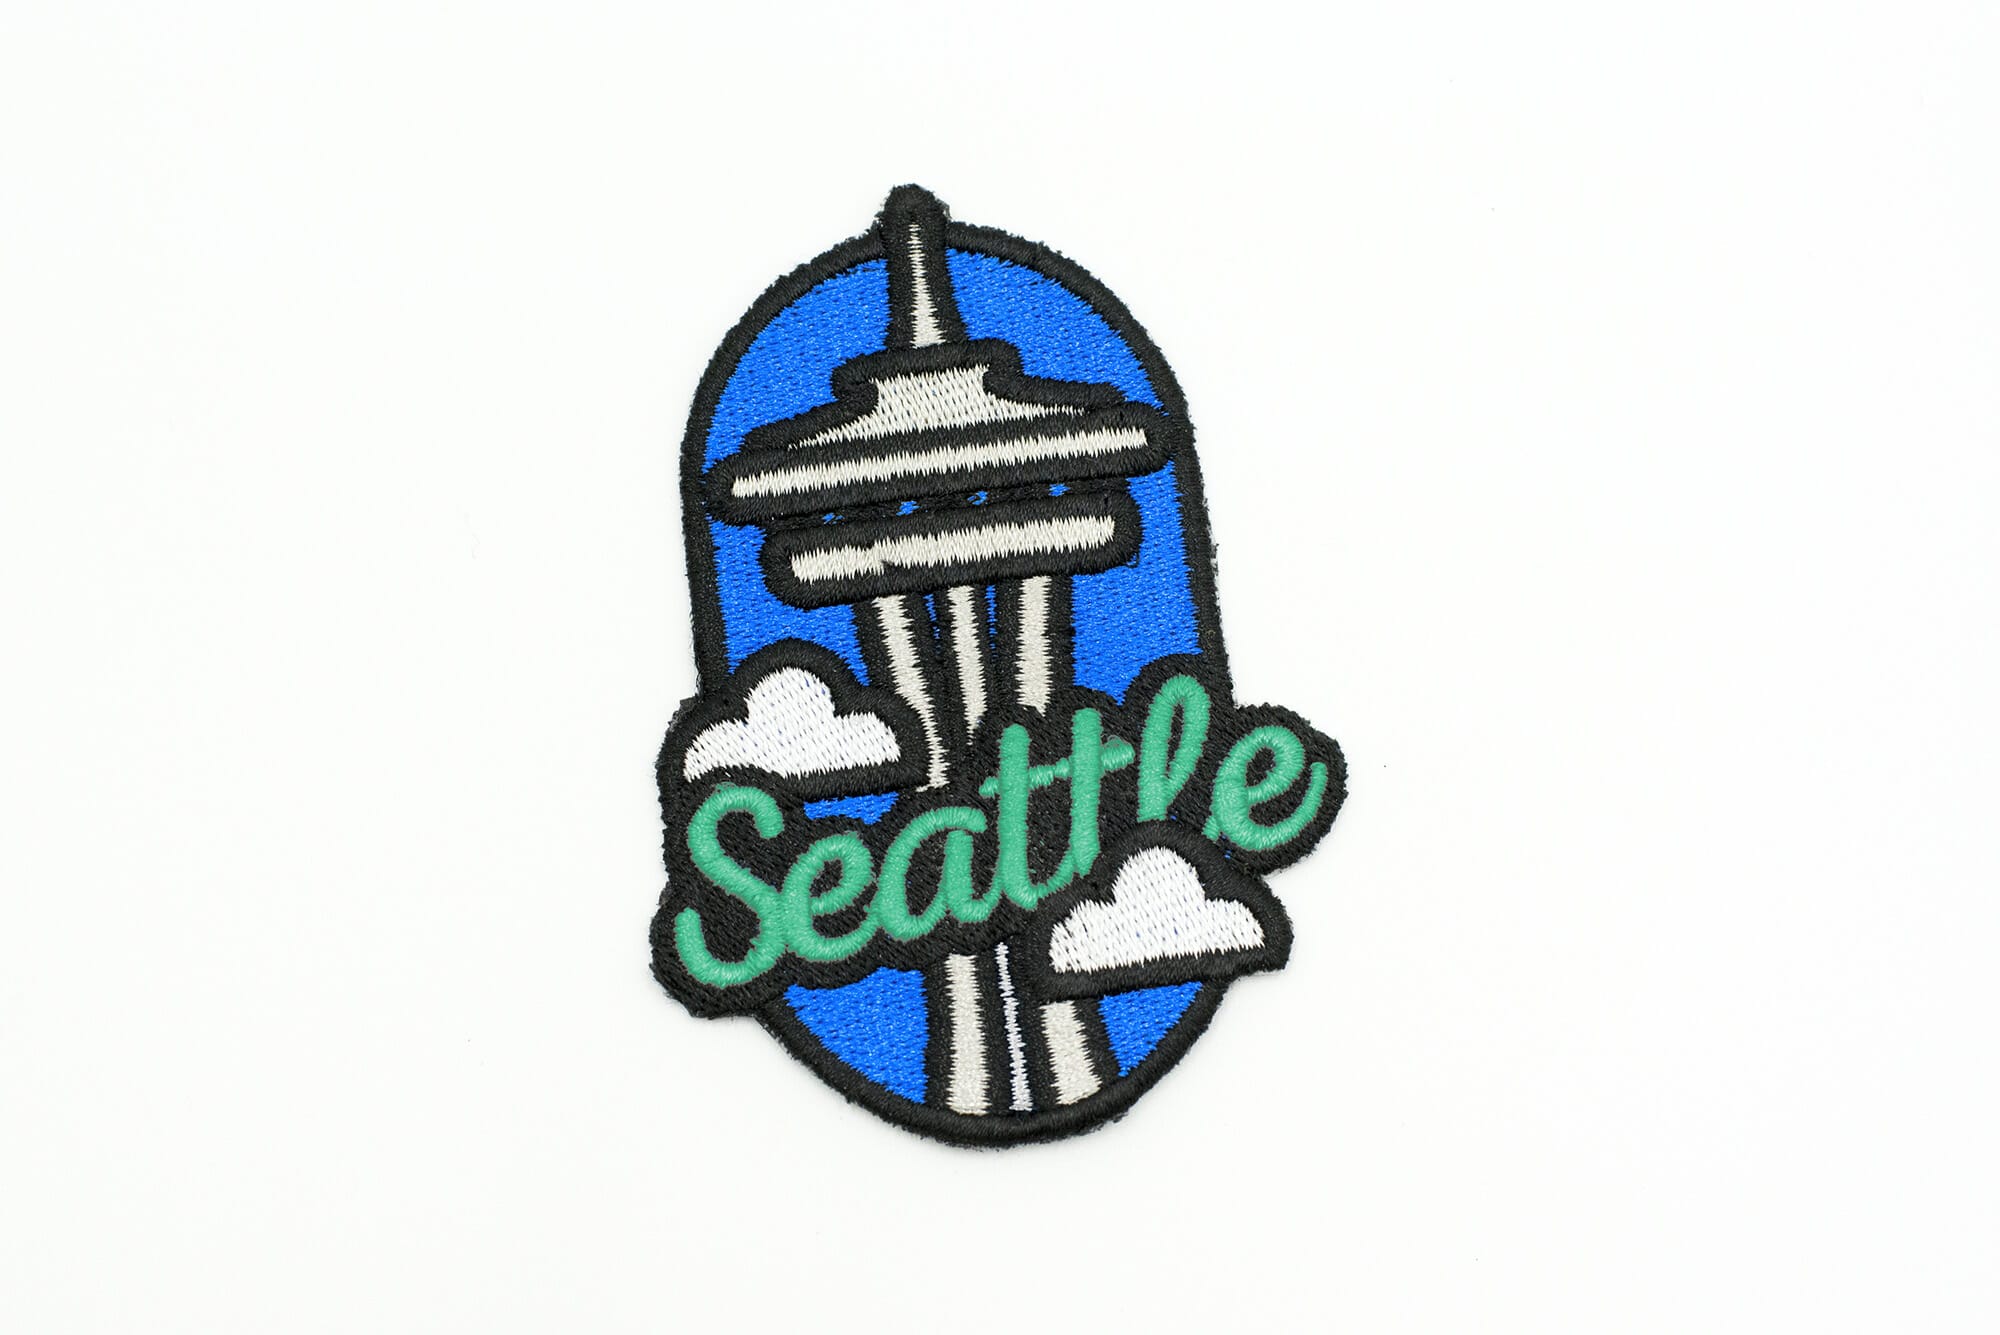 Seattle Travel Patch